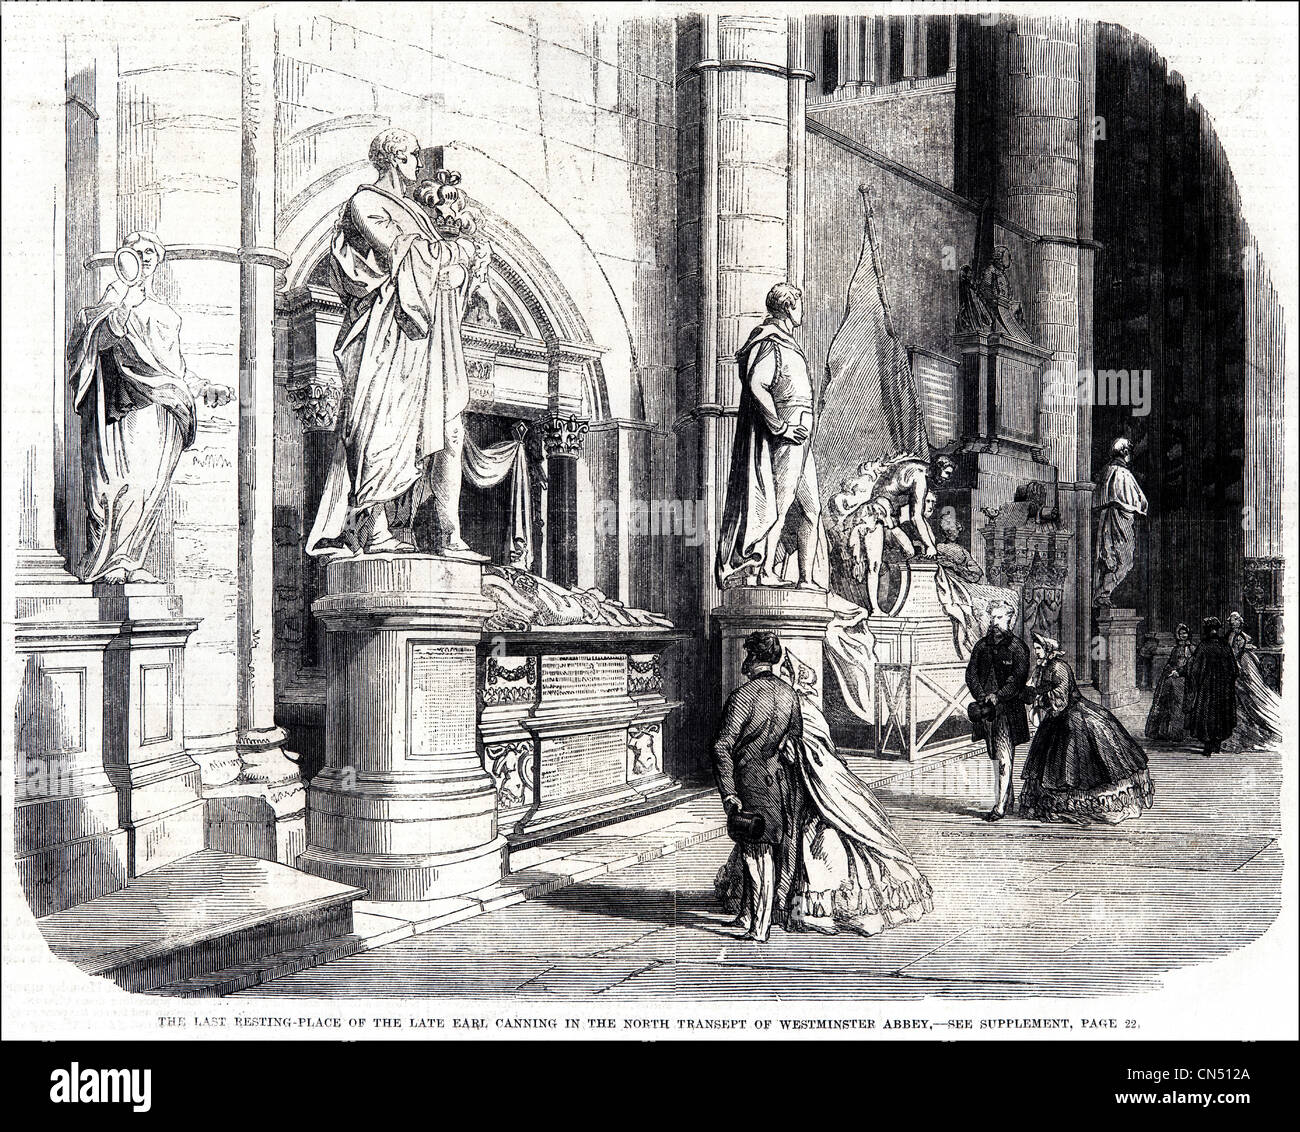 Tomb of Earl Canning in North Transept Westminster Abbey London, Victorian engraving dated 5th July 1862 Stock Photo